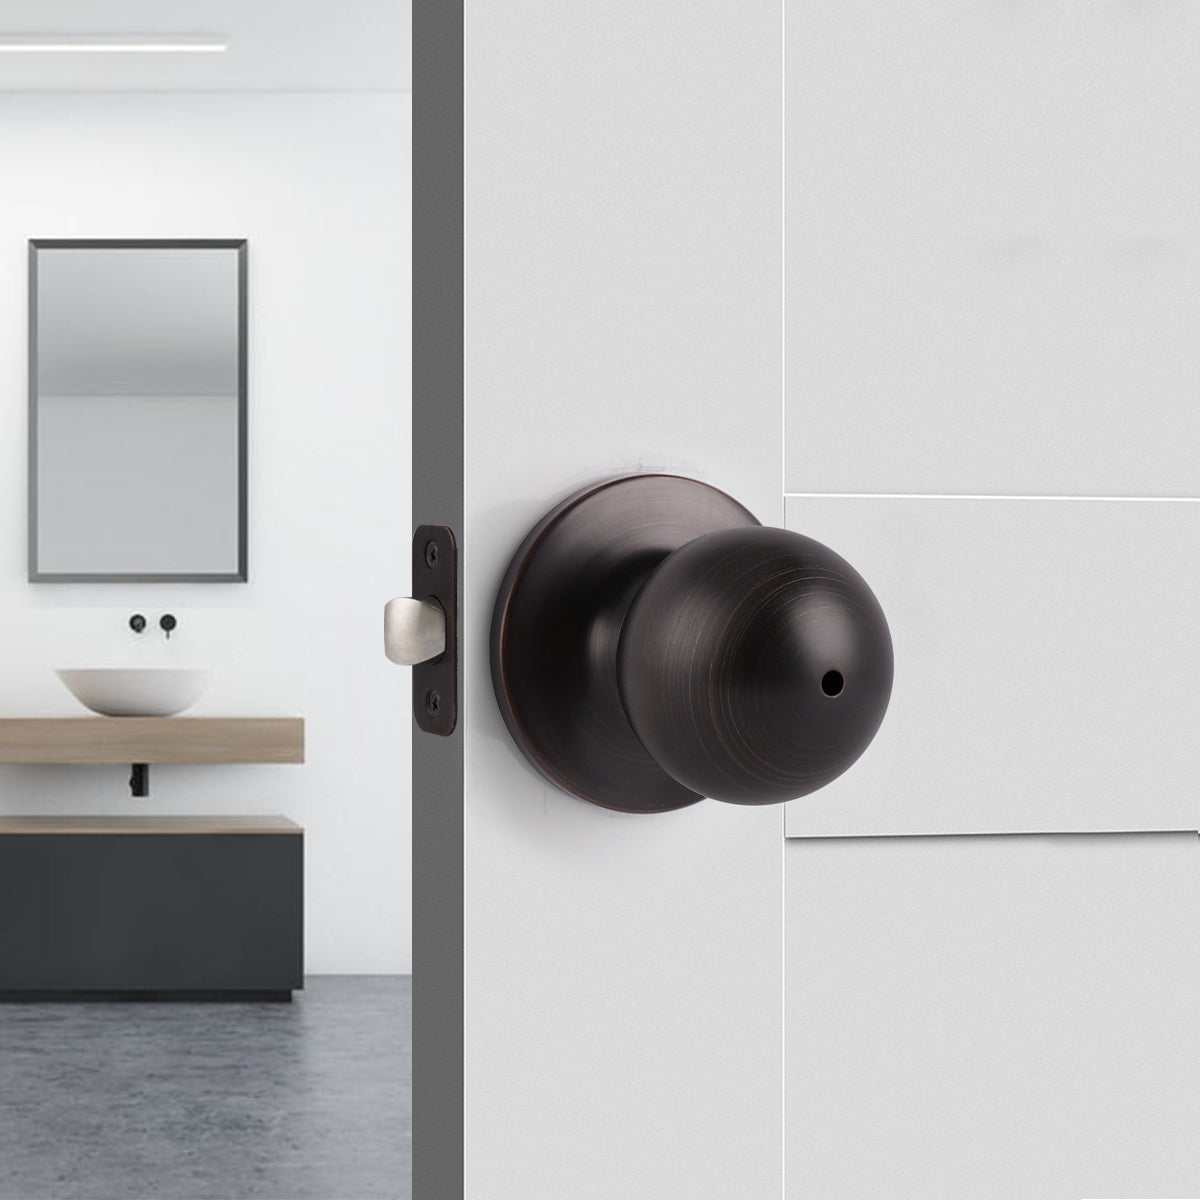 Single Connect Rod Round Ball Knobs Entry Lock /Privacy/Passage/Dummy Knob, Oil Rubbed Bronze Finish DL5763ORB